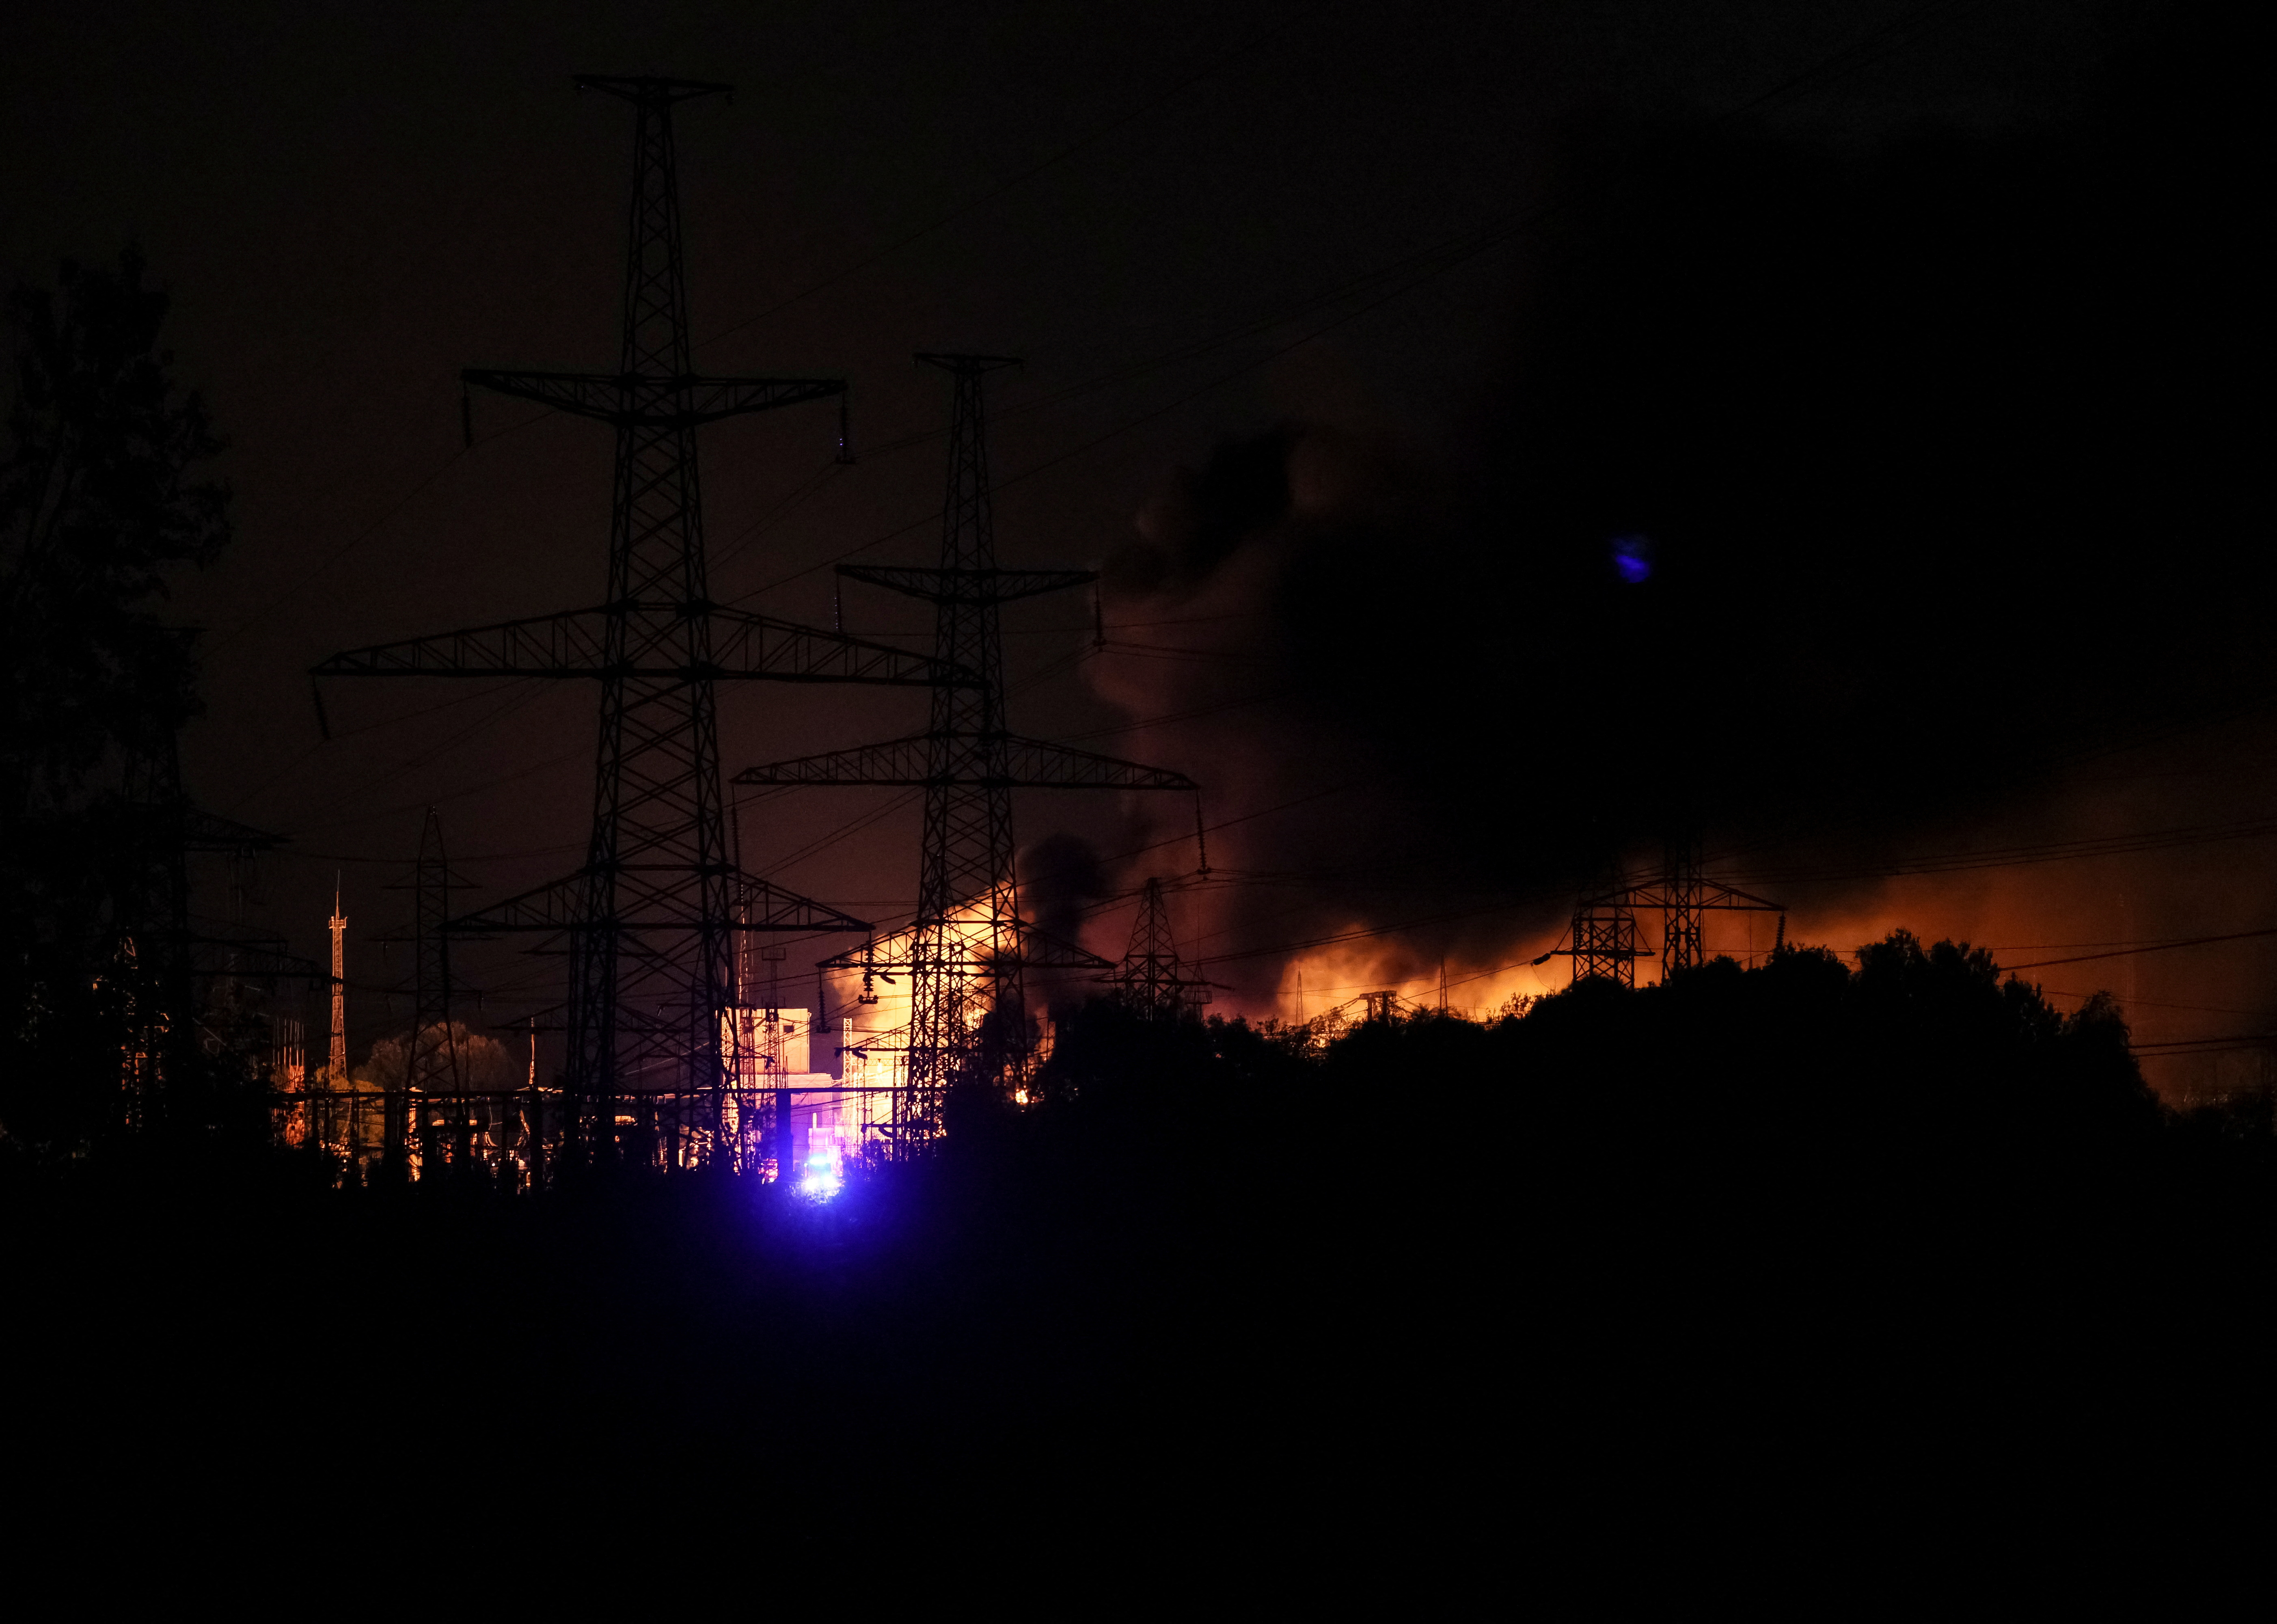 View shows a burning thermal power plant hit by a Russian missile strike in Kharkiv